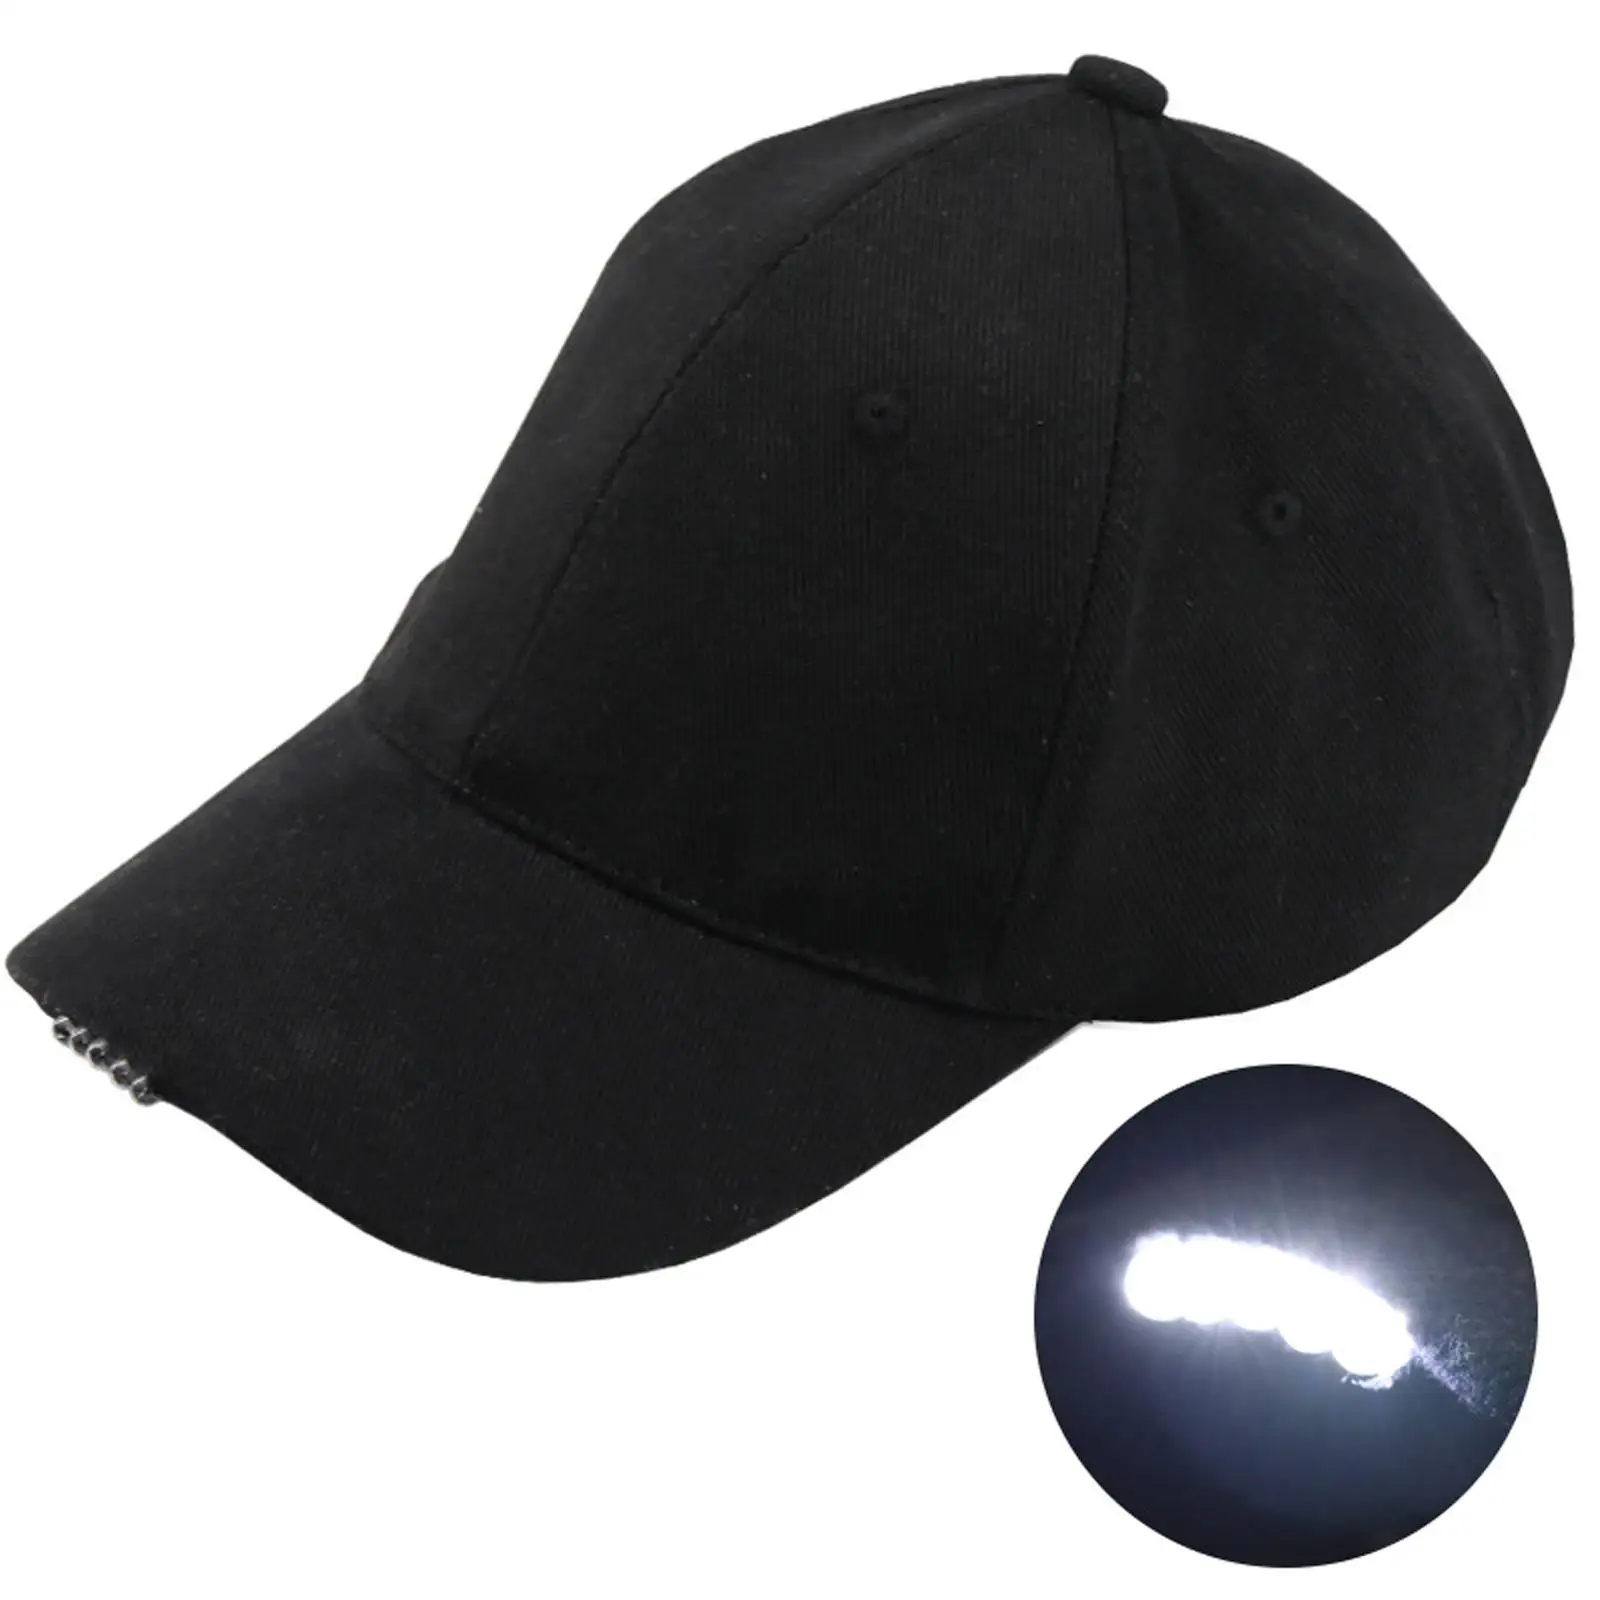 LED Baseball Hat with 5 LED Lamp Rechargeable for Party Outdoor Jogging